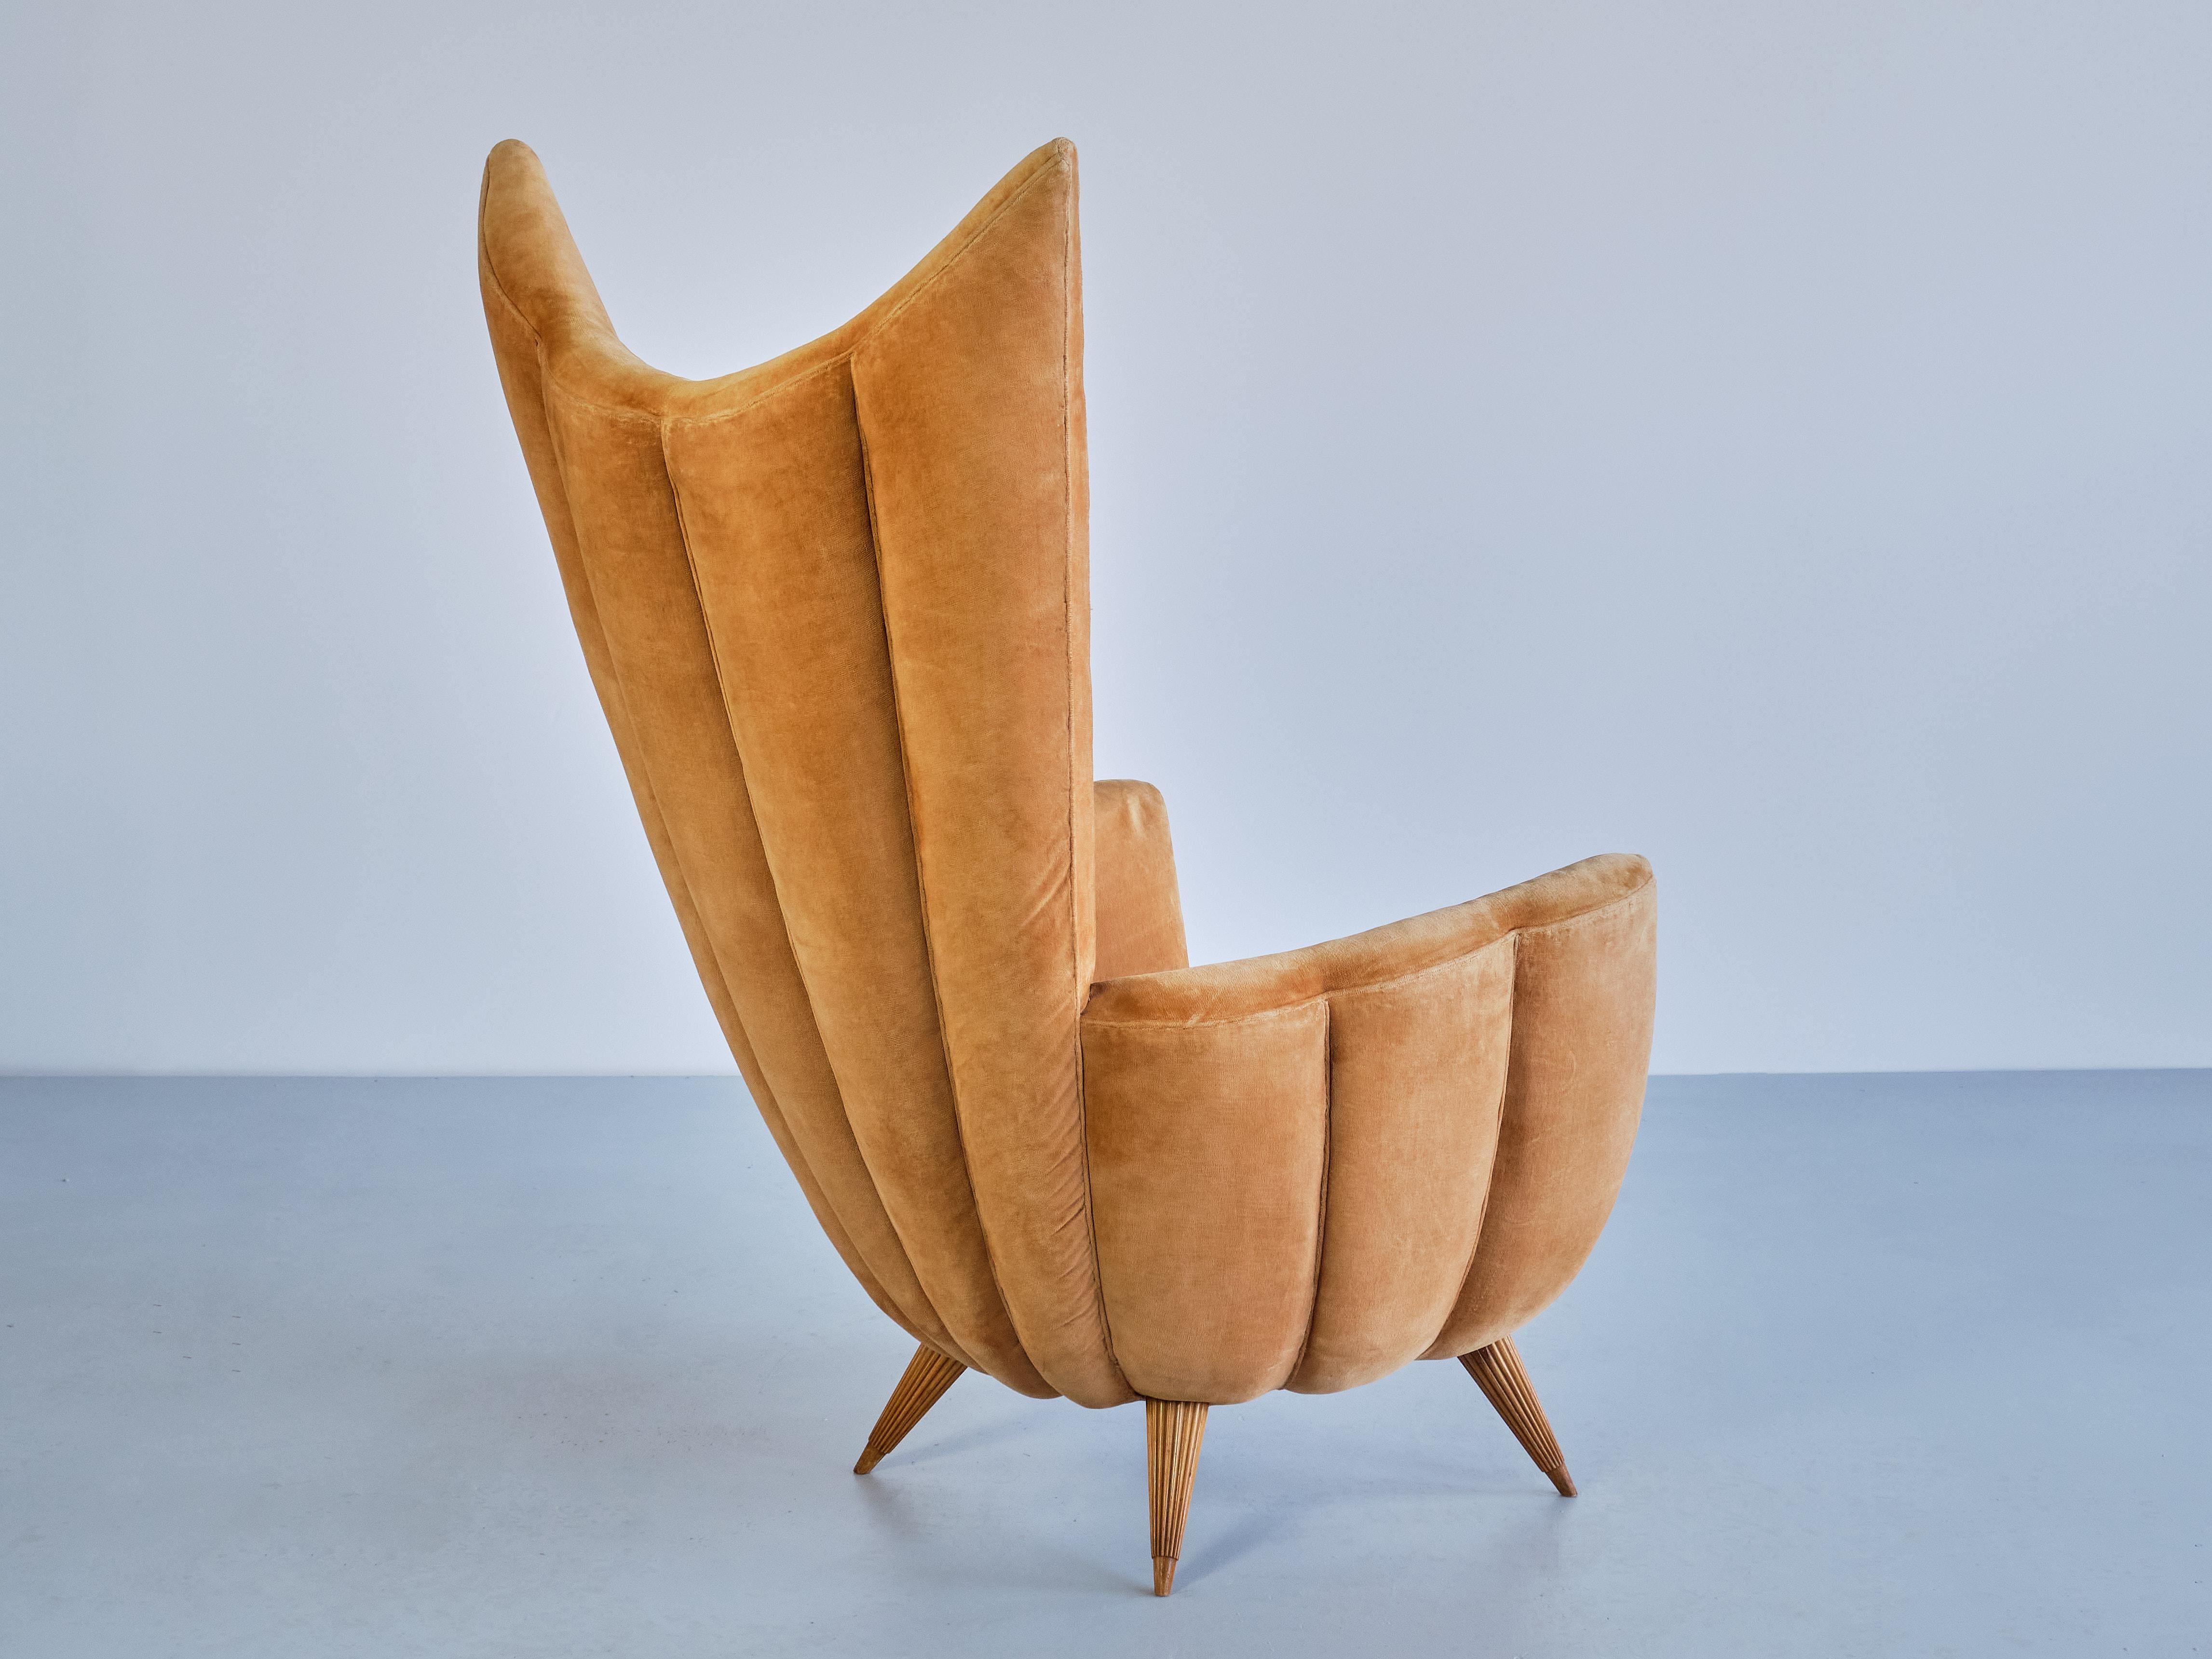 Exceptional Guglielmo Ulrich Armchair in Velvet and Fluted Walnut, Italy, 1940s For Sale 1